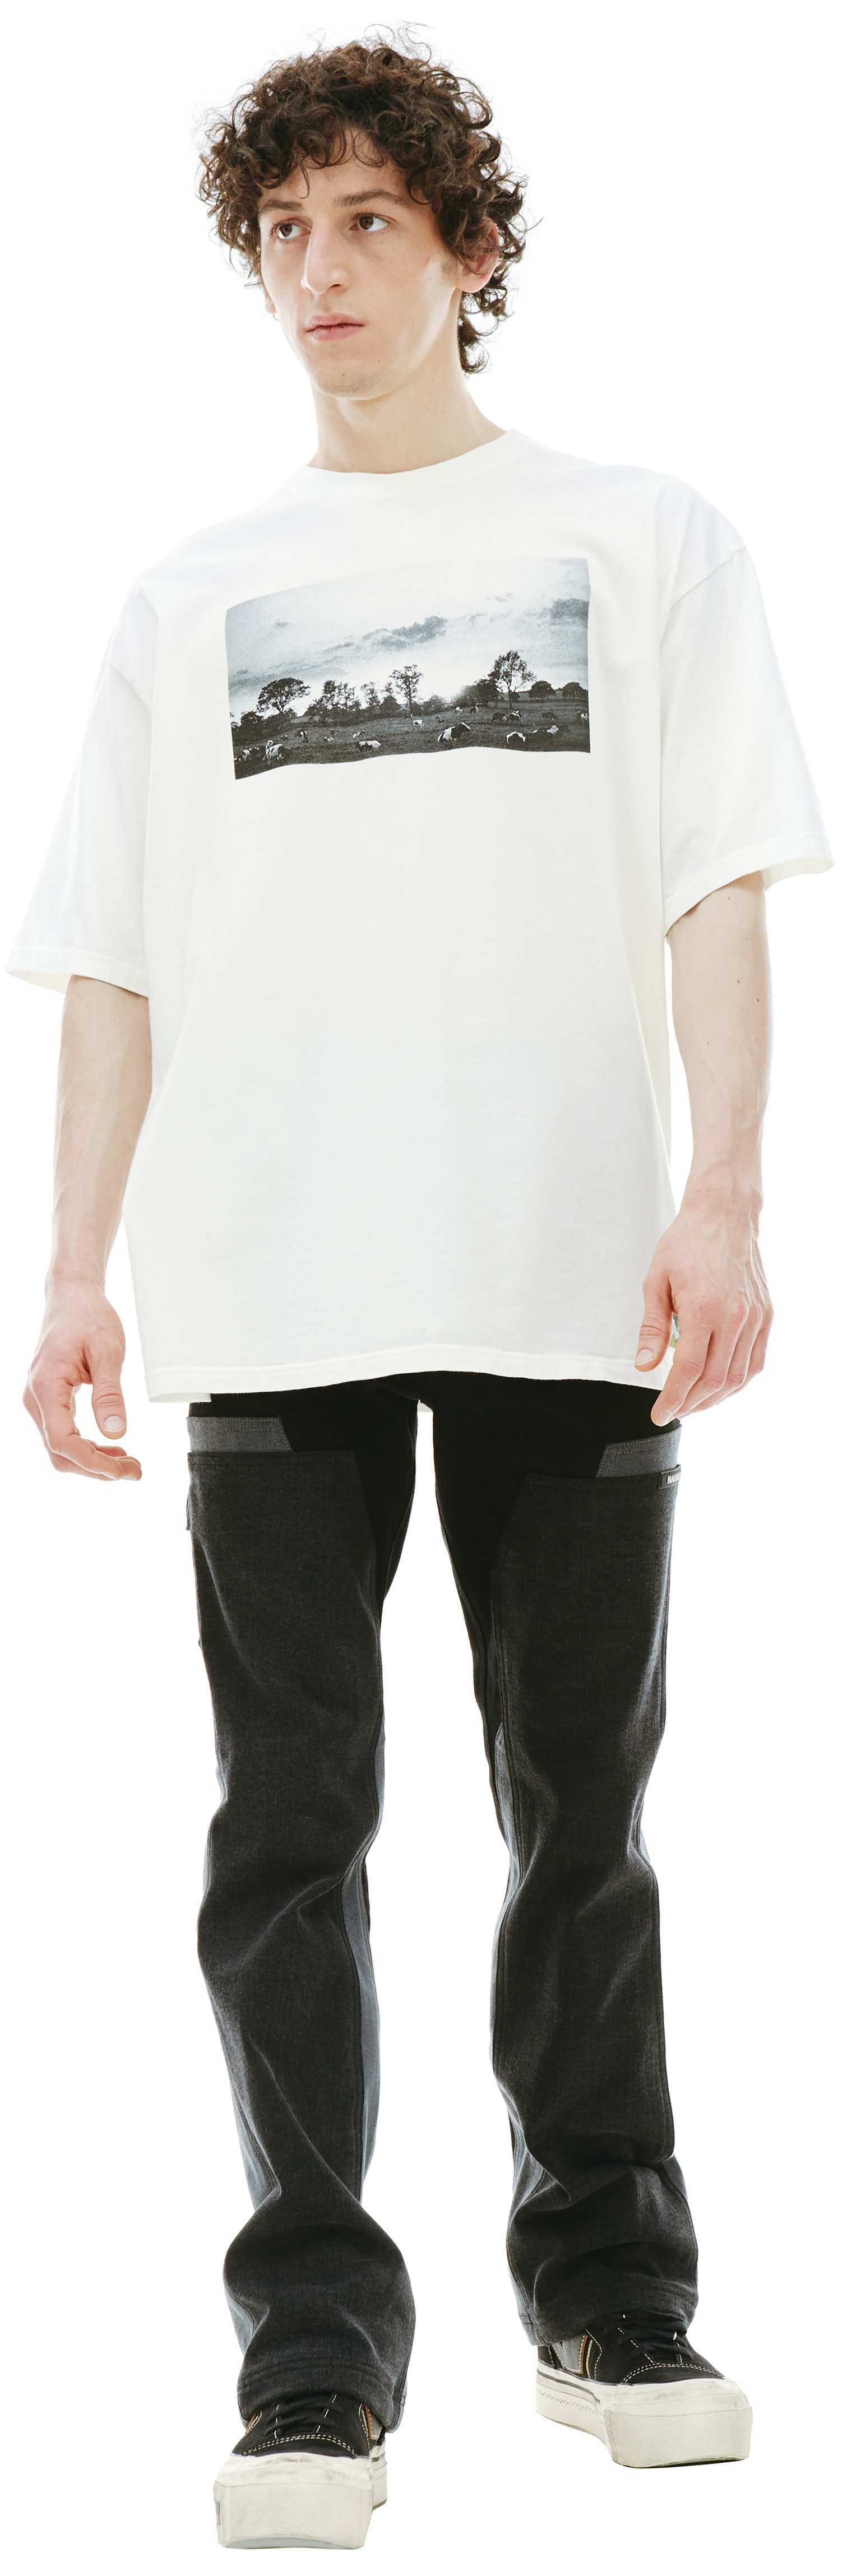 Undercover Graphic print t-shirt